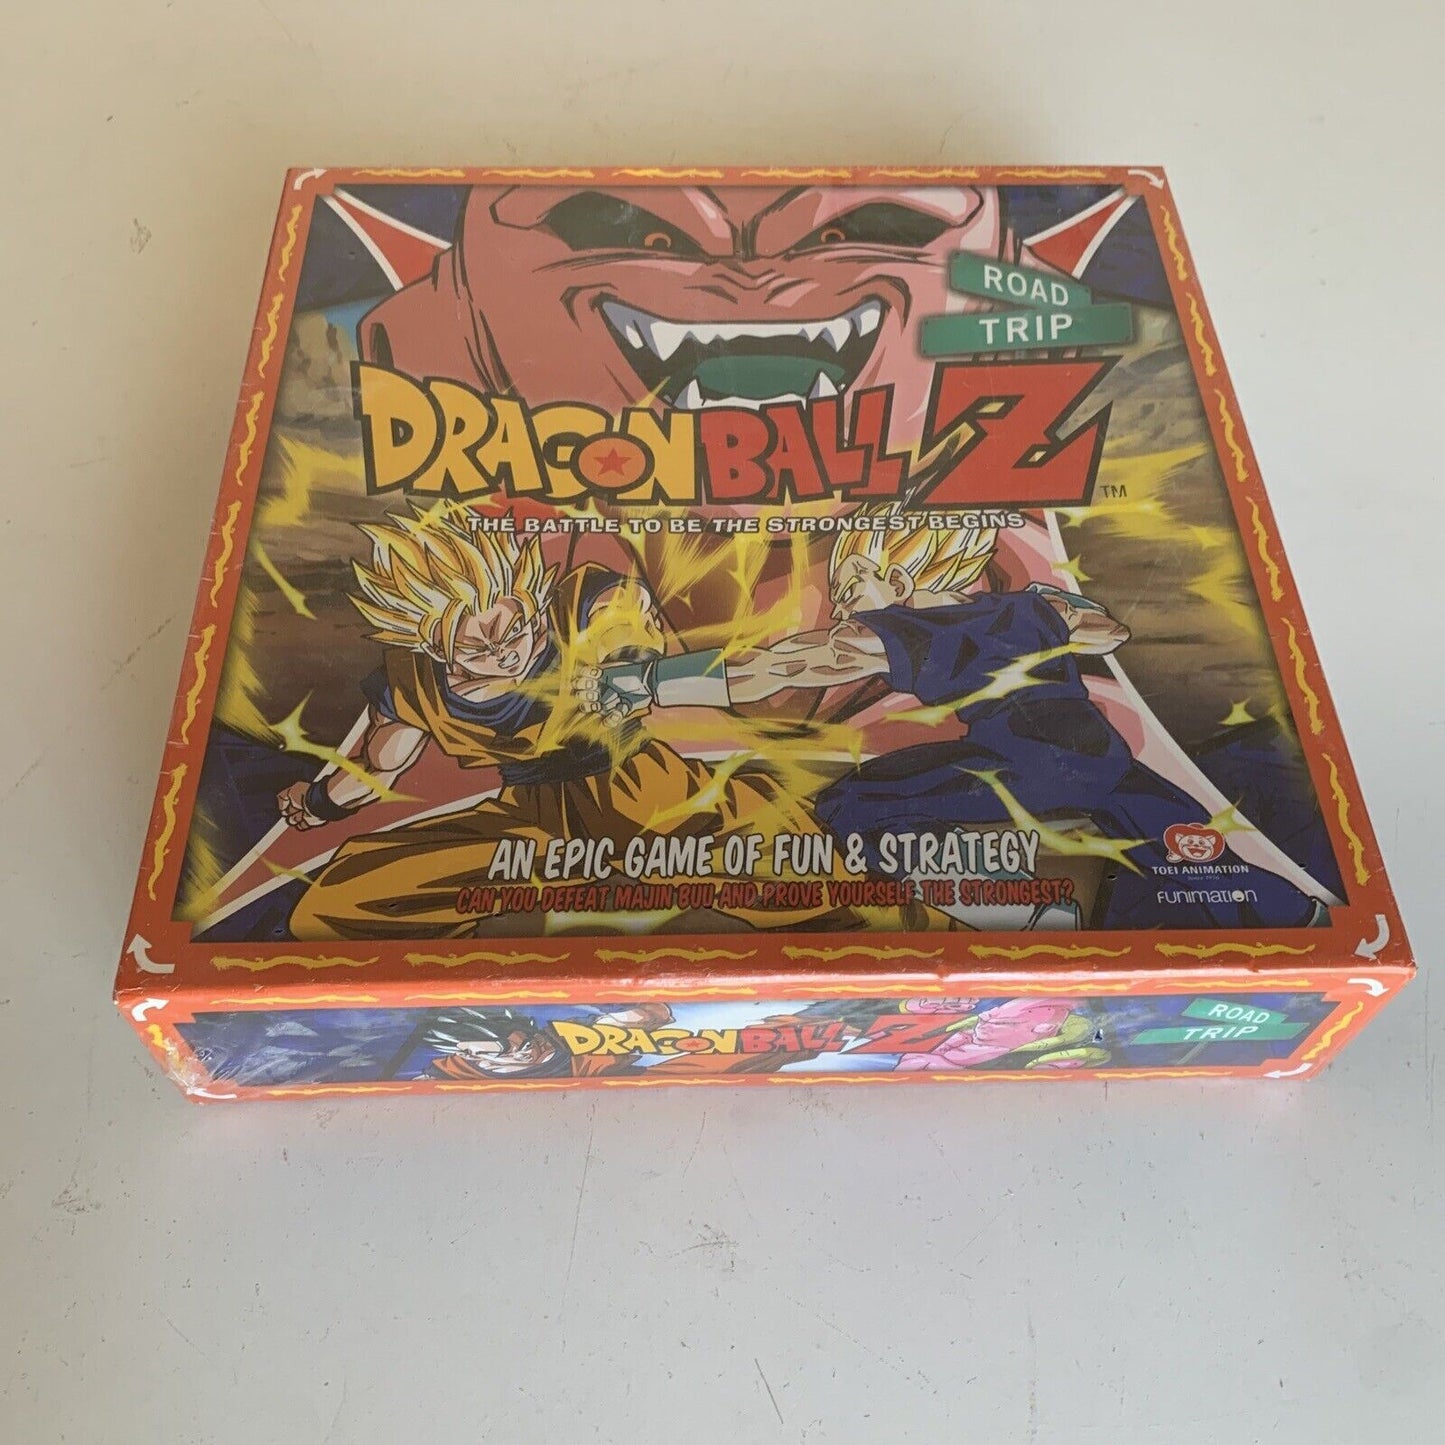 *New Sealed* Dragon Ball Z Road Trip Board Game - Battle of the Strongest